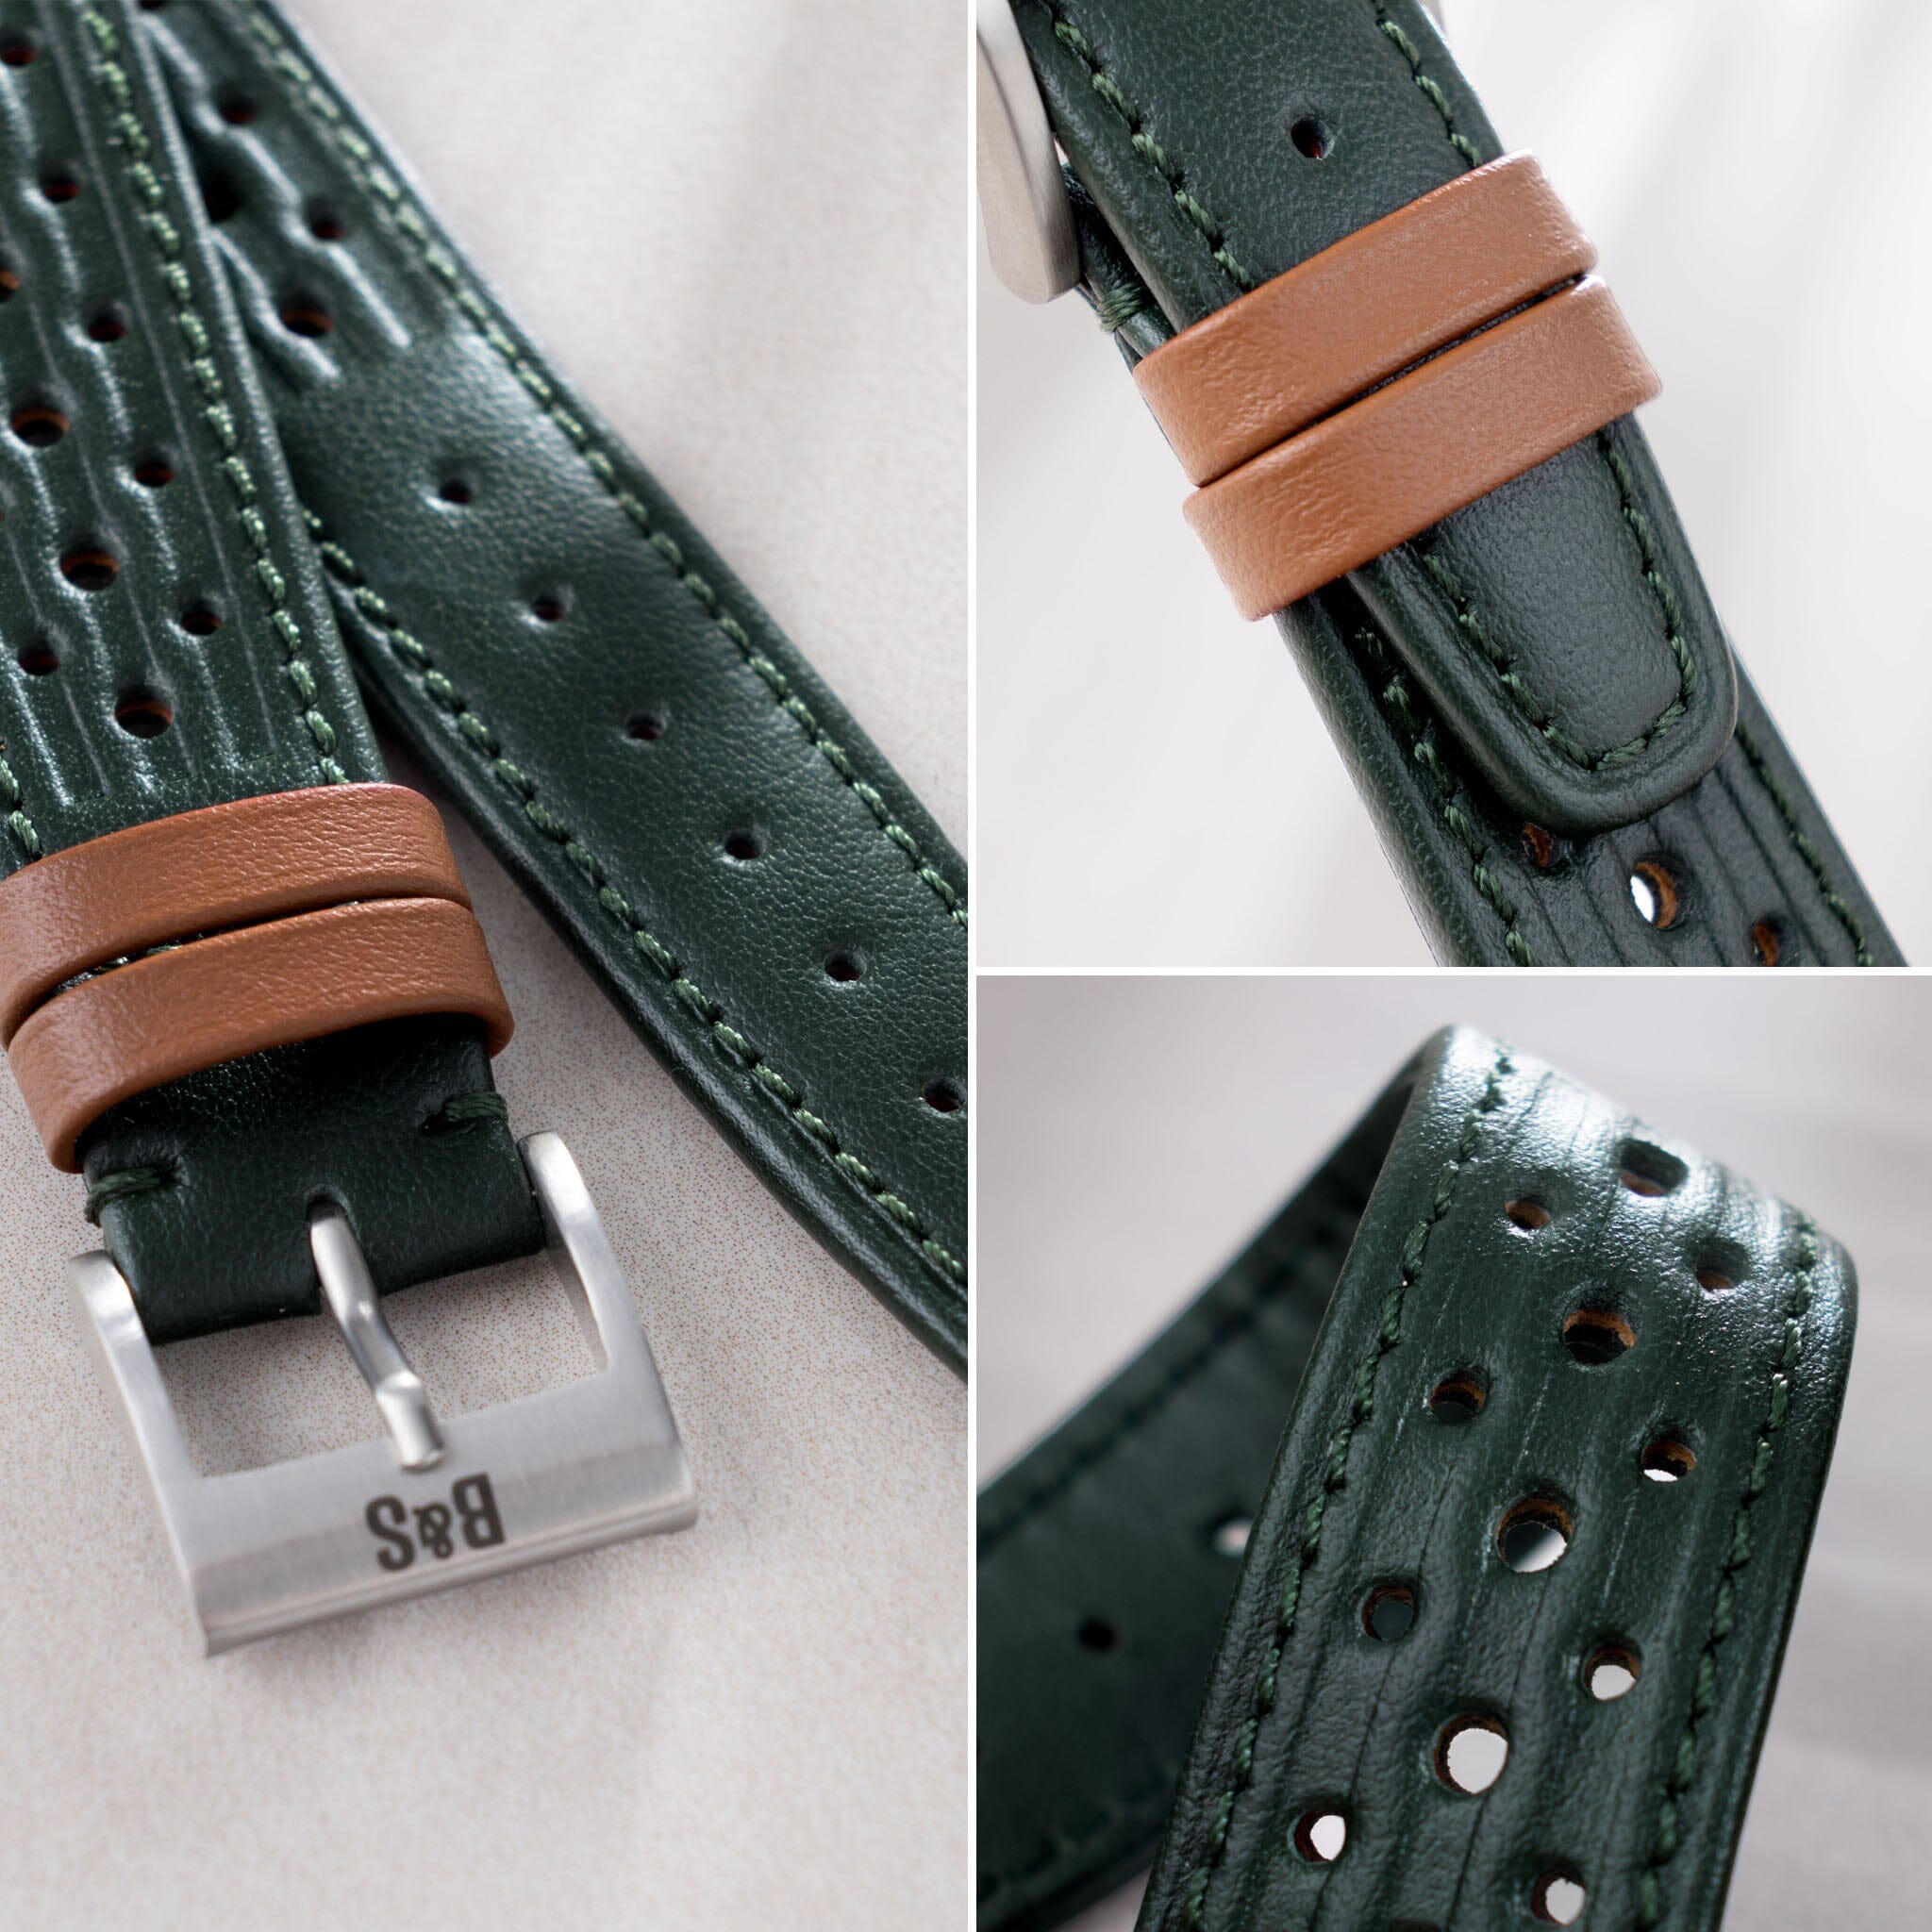 British Racing Green Leather Watch Strap - Jubilee Edition